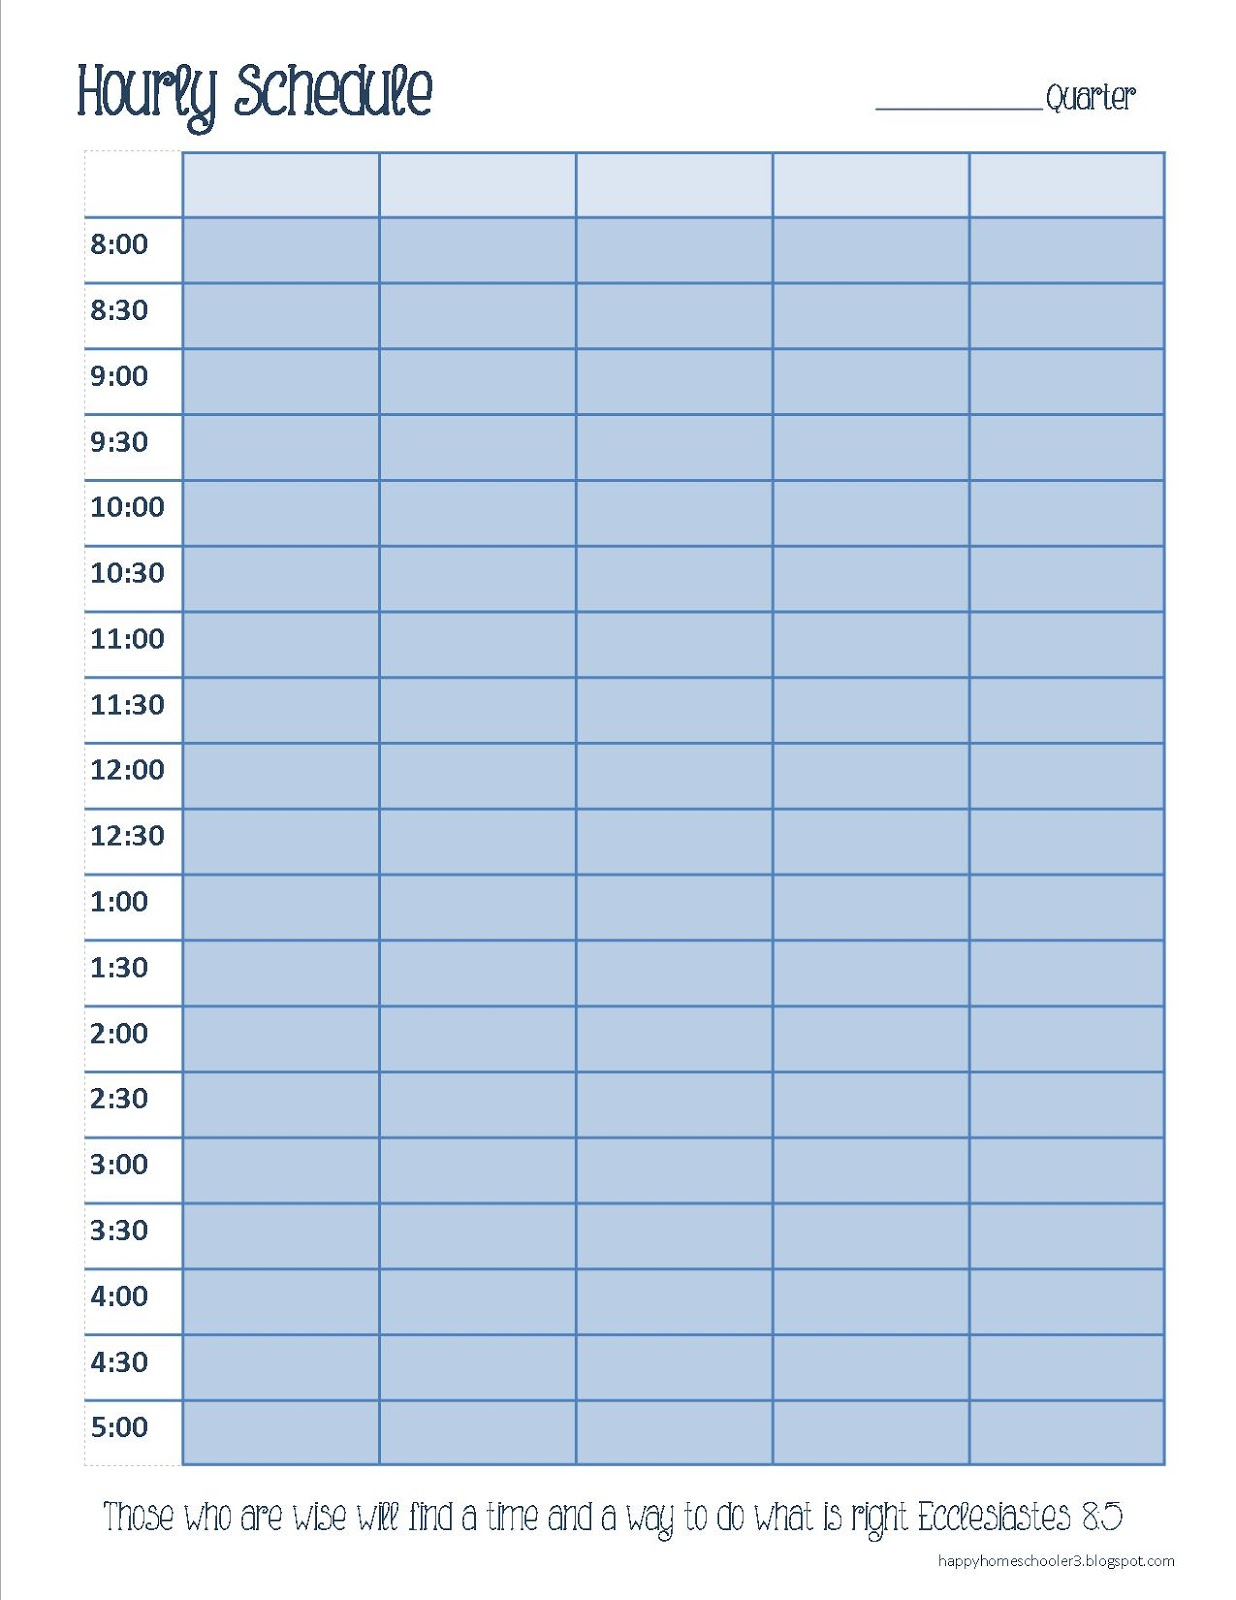 The Happy Homeschooler: Our Homeschool Planner: A Free in Blank Schedule With Hourly Counter